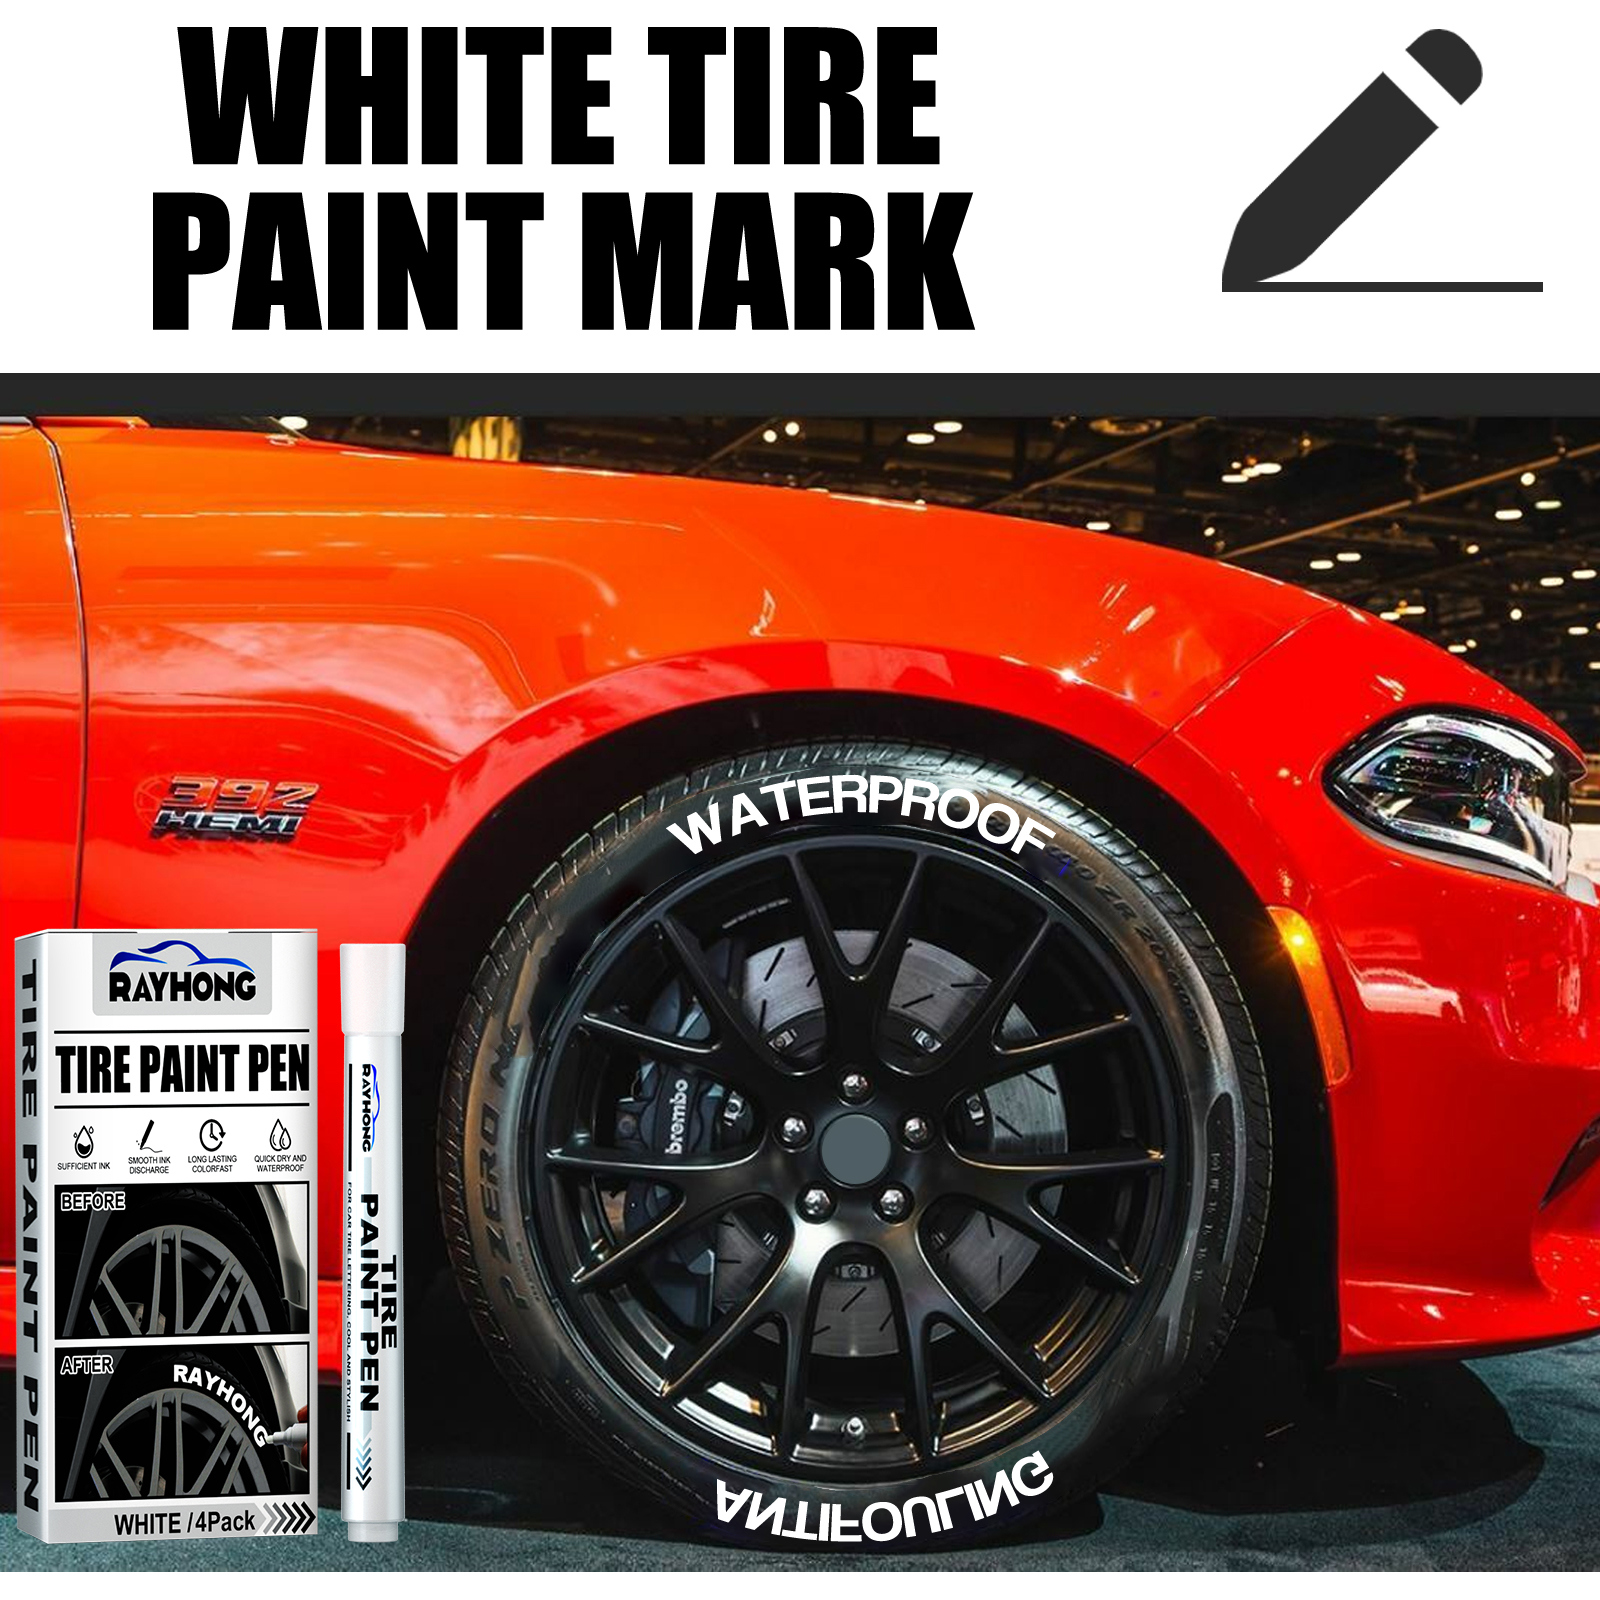 White Tire Paint Markers for Car Tire Lettering-Permanent Tire Paint Pens  are designed with weatherproof ink for car tires （4pcs）